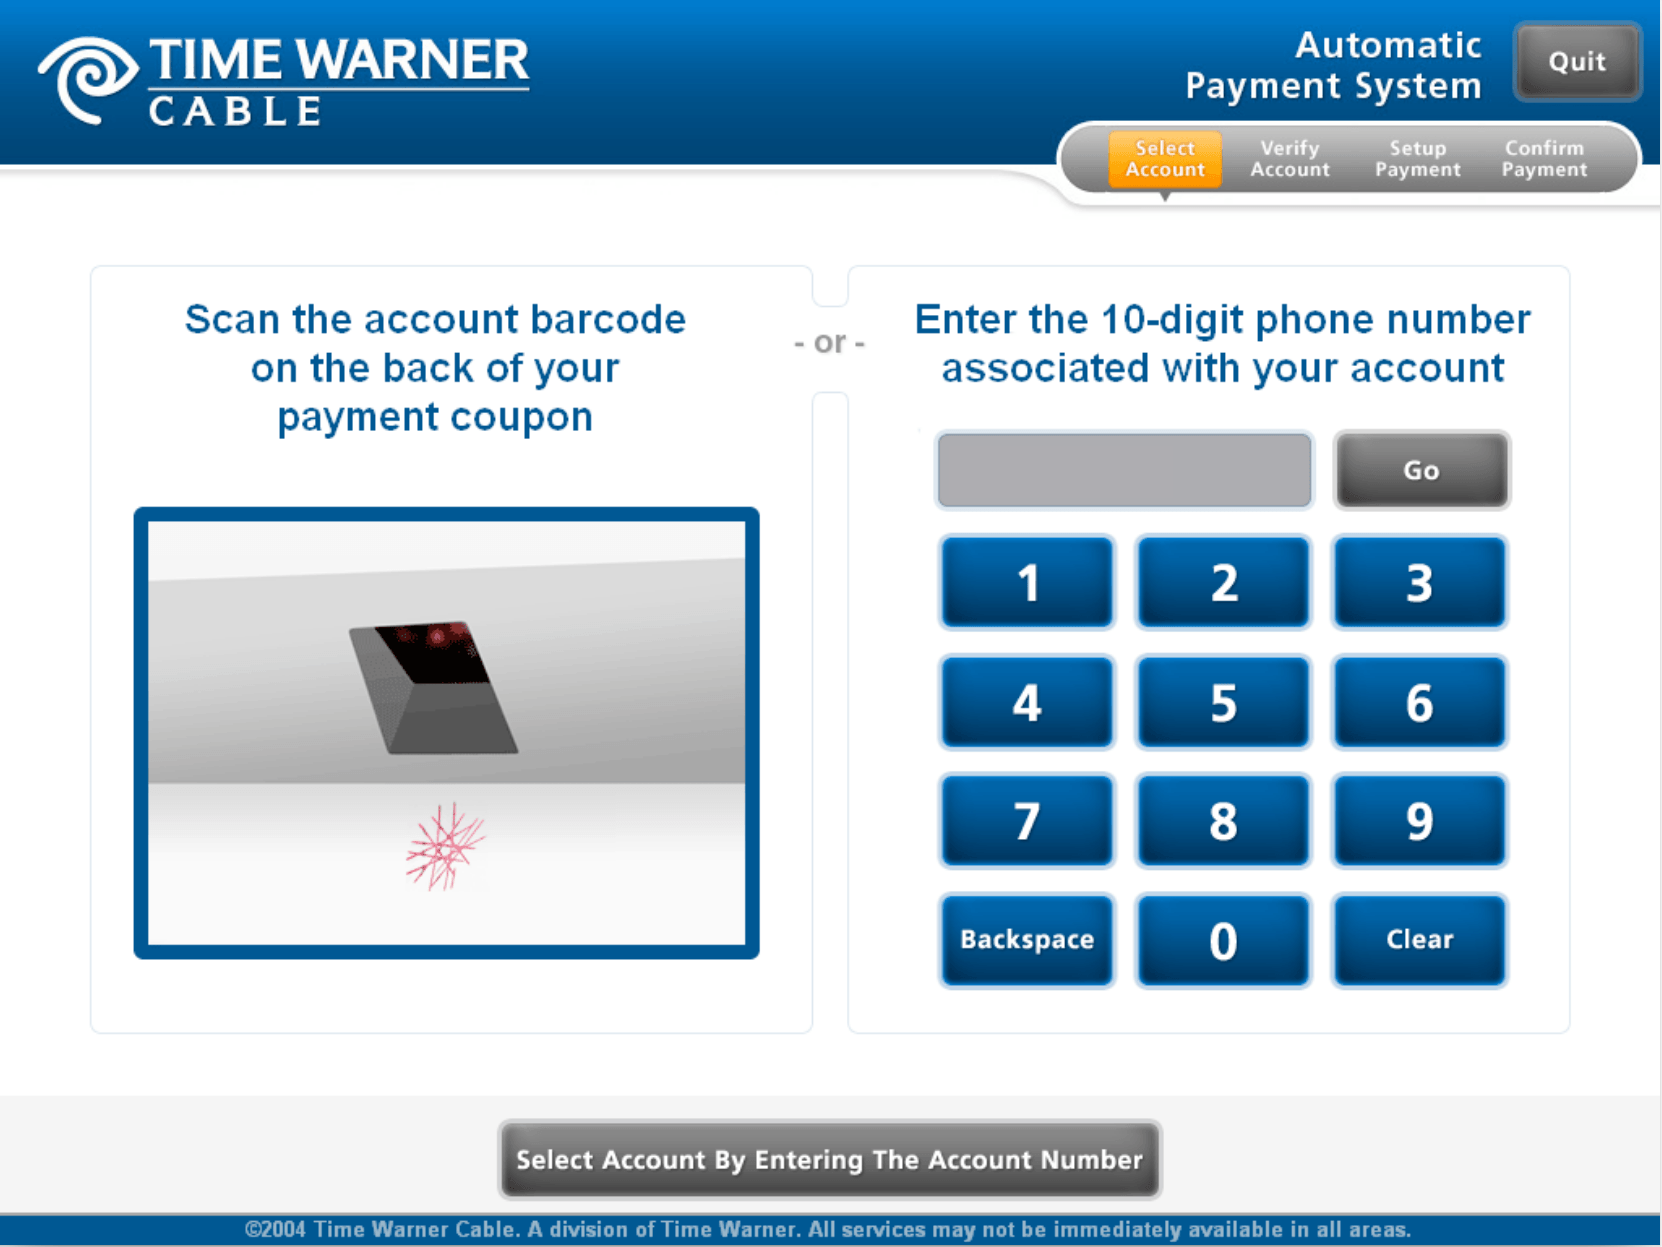 Time Warner Cable payment kiosk login screen with different options to make payment